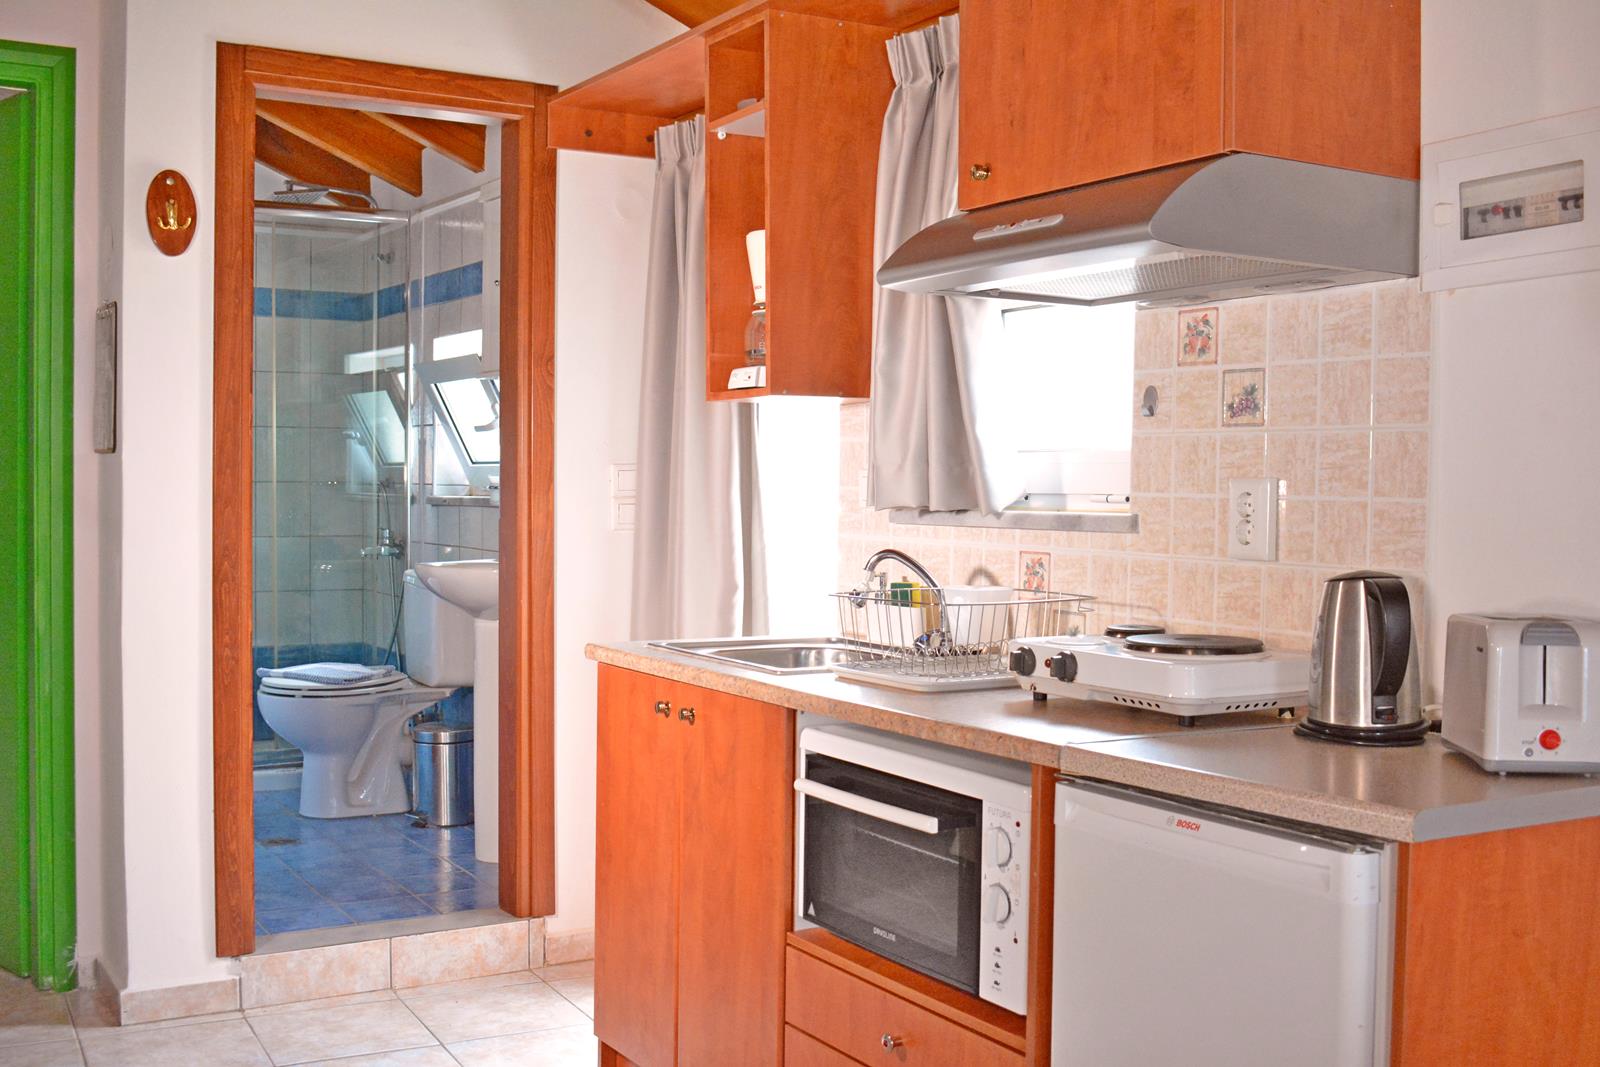 http://hotels%20in%20chania%20|%20Melinas%20House%20|%20Chania,%20Crete